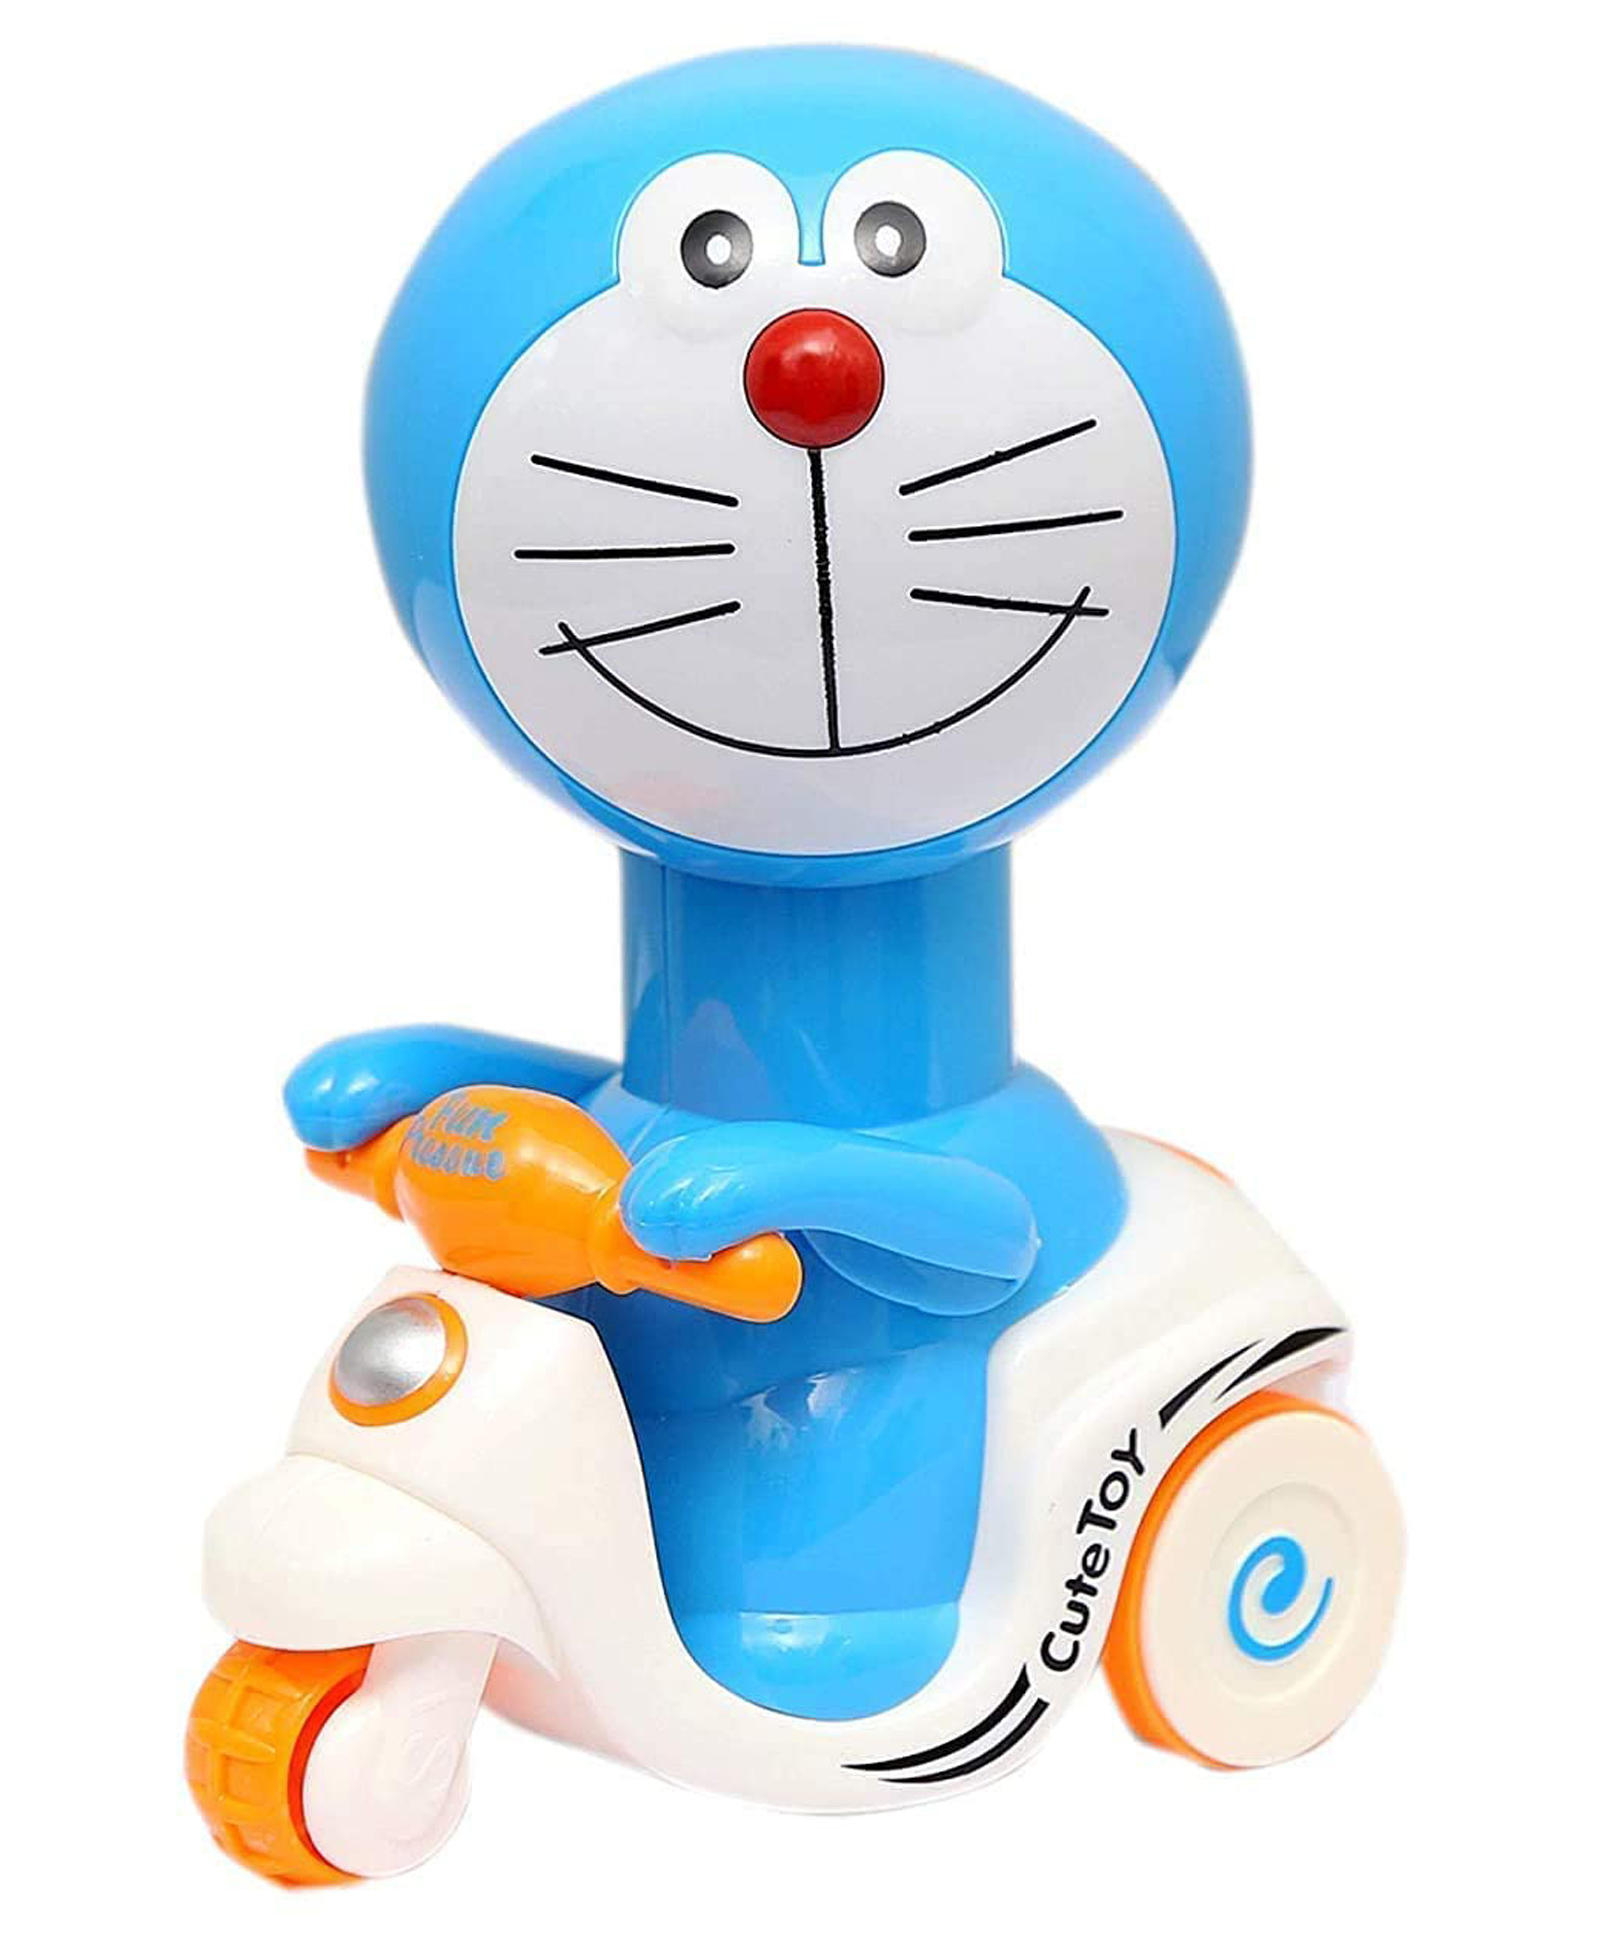 AKN TOYS Doraemon Pressure Toddler Car Toy Push and Go Doraemon Scooter Toy  for Kids - Blue Online India, Buy Pull Along Toys for (12 Months-3 Years)  at  - 11787478